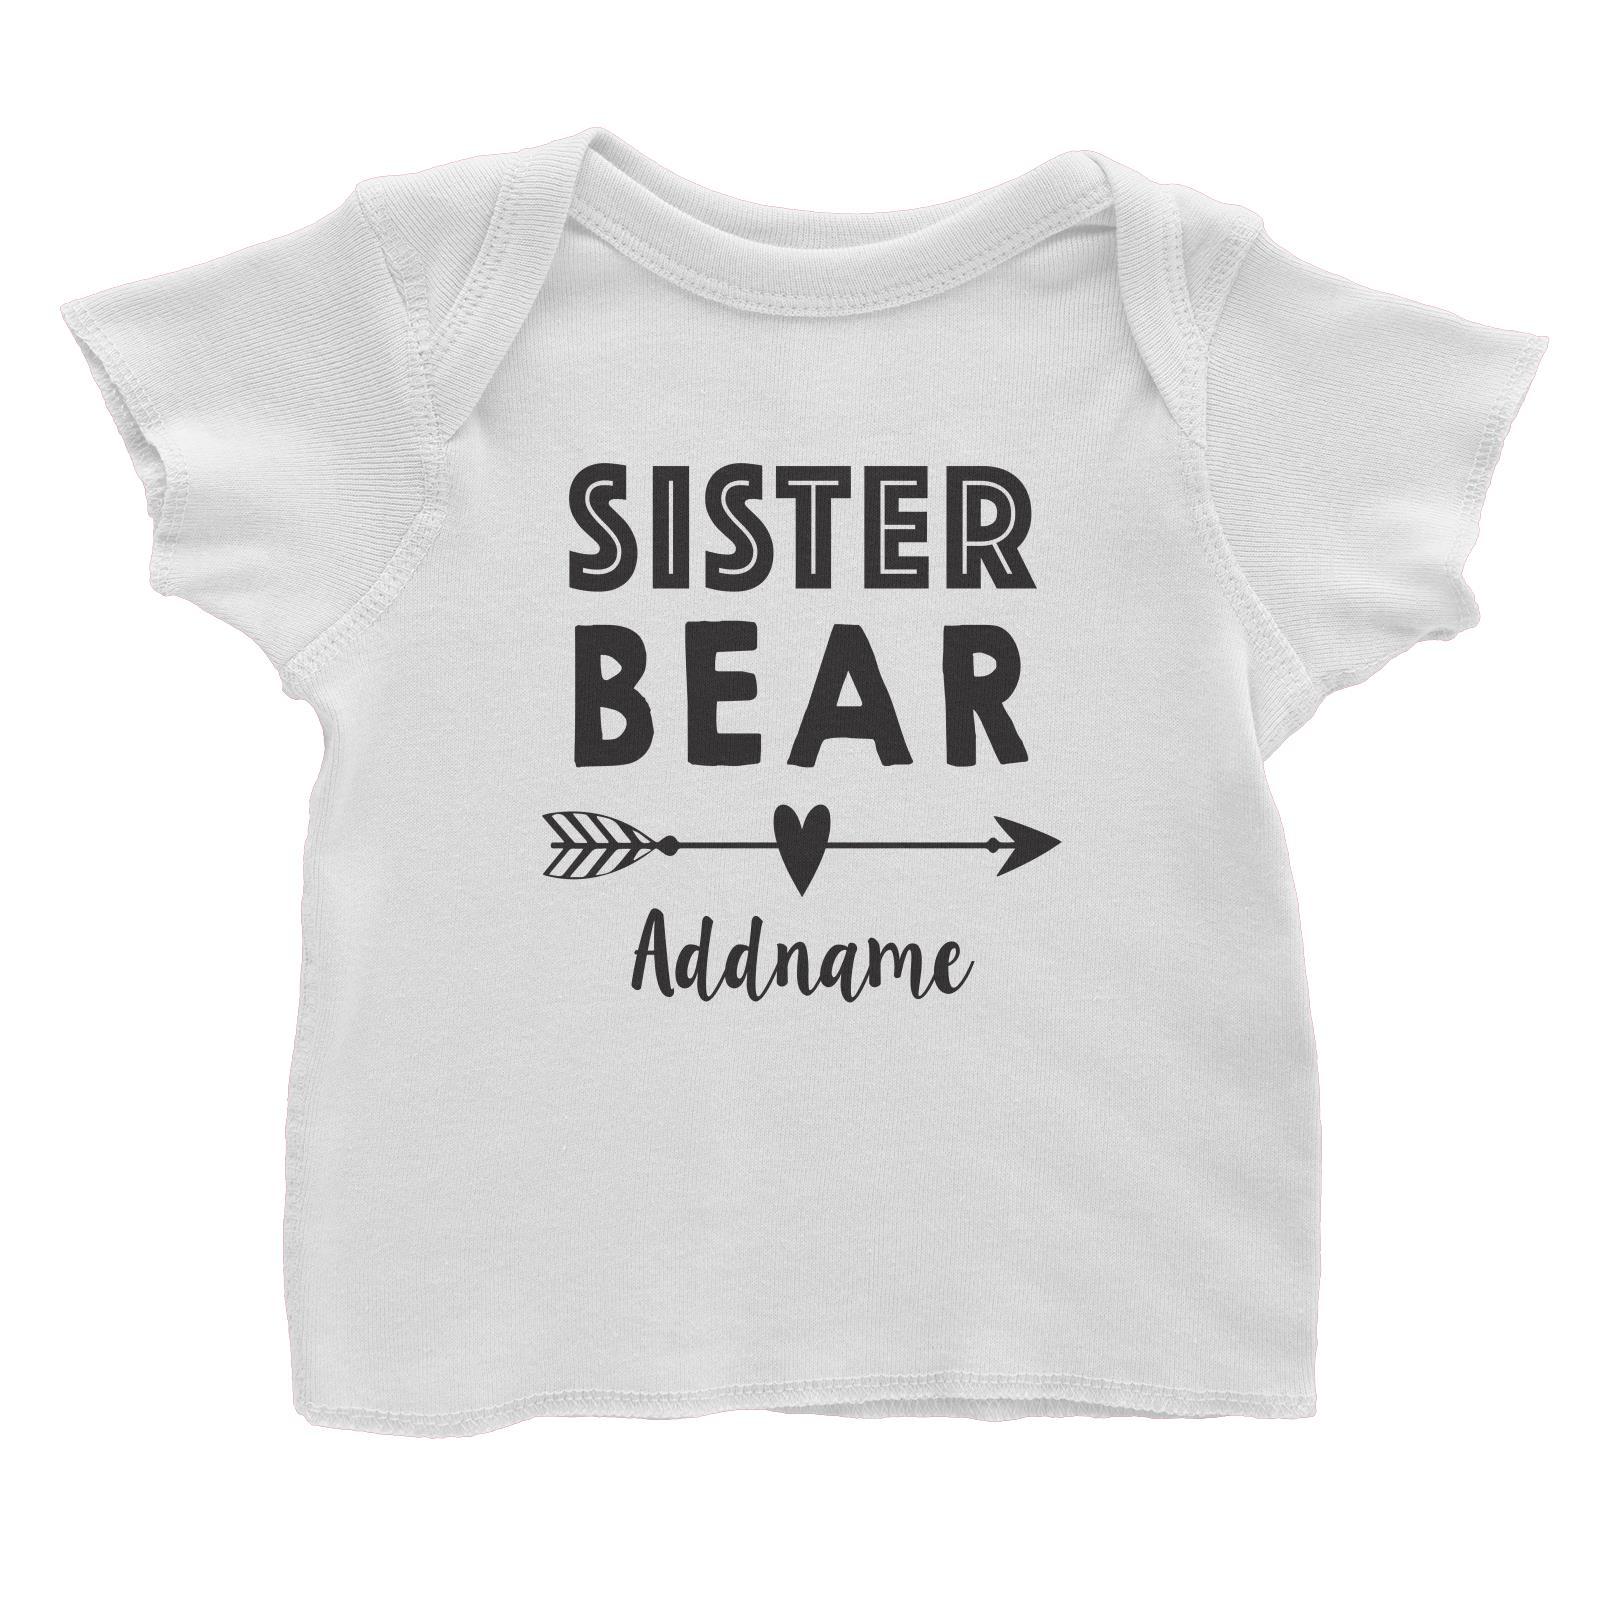 Sister Bear Addname Baby T-Shirt  Matching Family Personalizable Designs